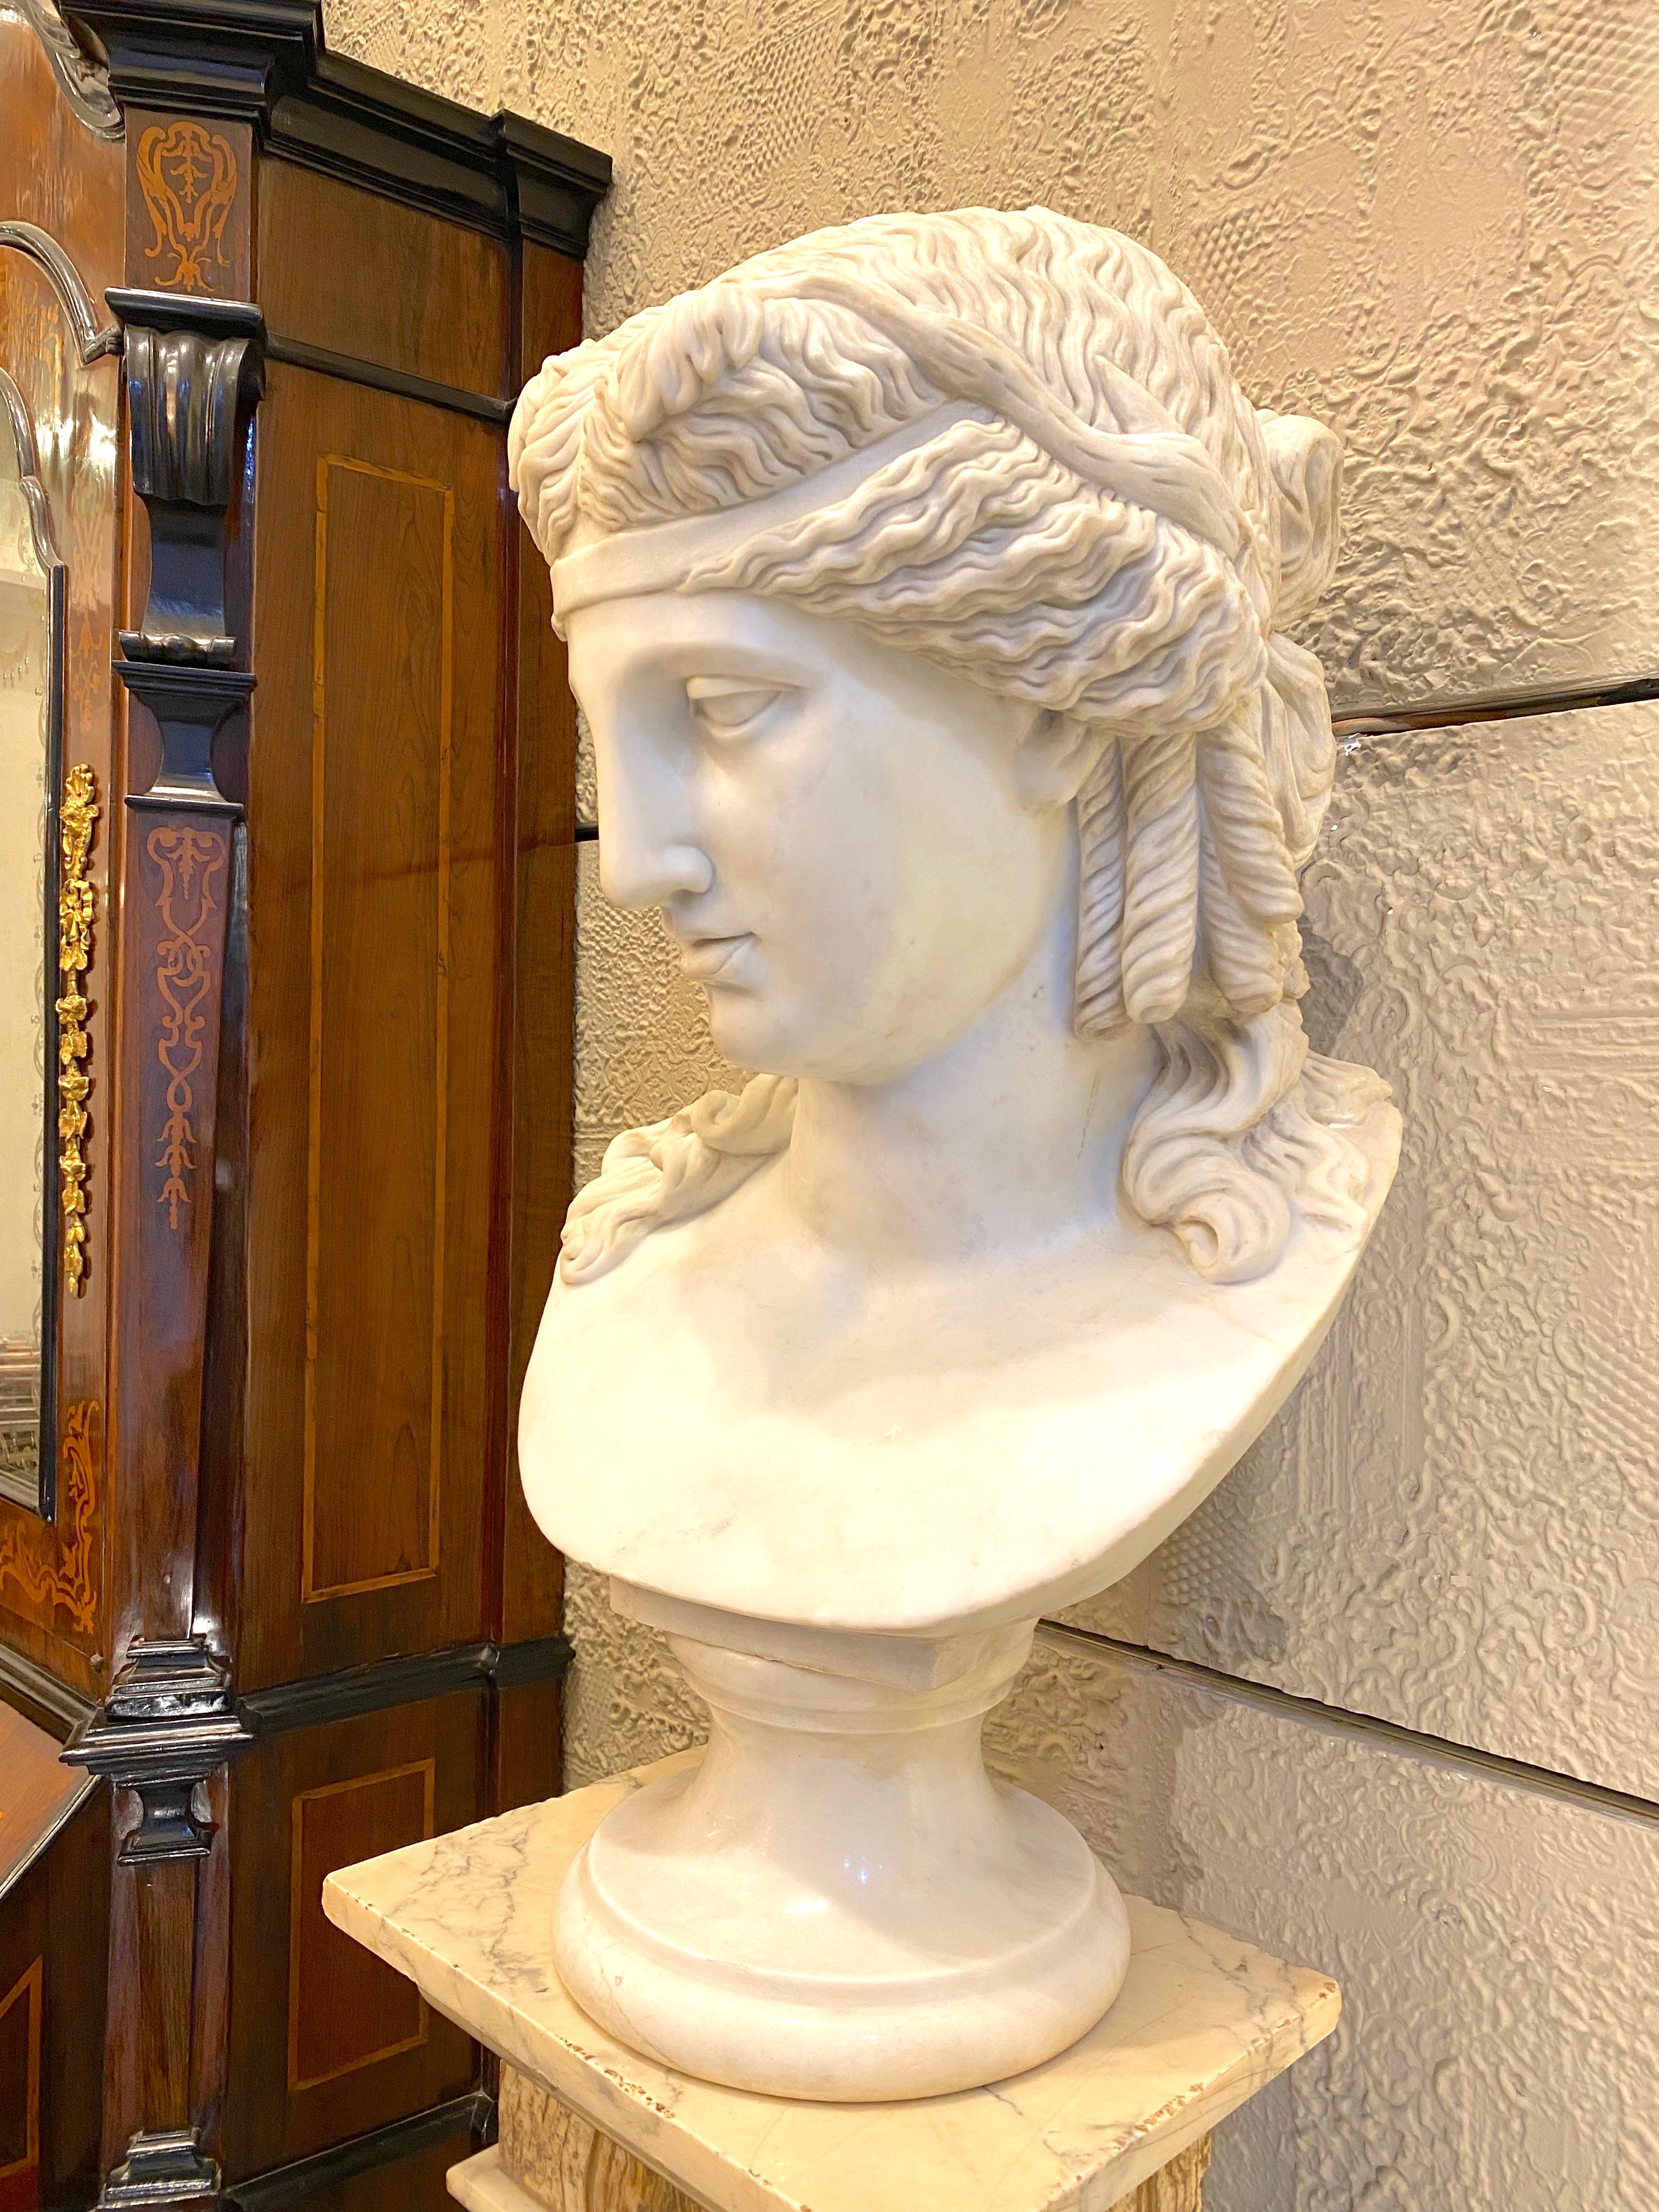 Very fine large Neoclassical  white marble bust of Arianna wearing a diadem with grape vine in her hair  after the antique in Vatican Museum .
Ariadne, in Greek mythology (Latin Arianna, French Arianne), was daughter of King Minos of Crete and his